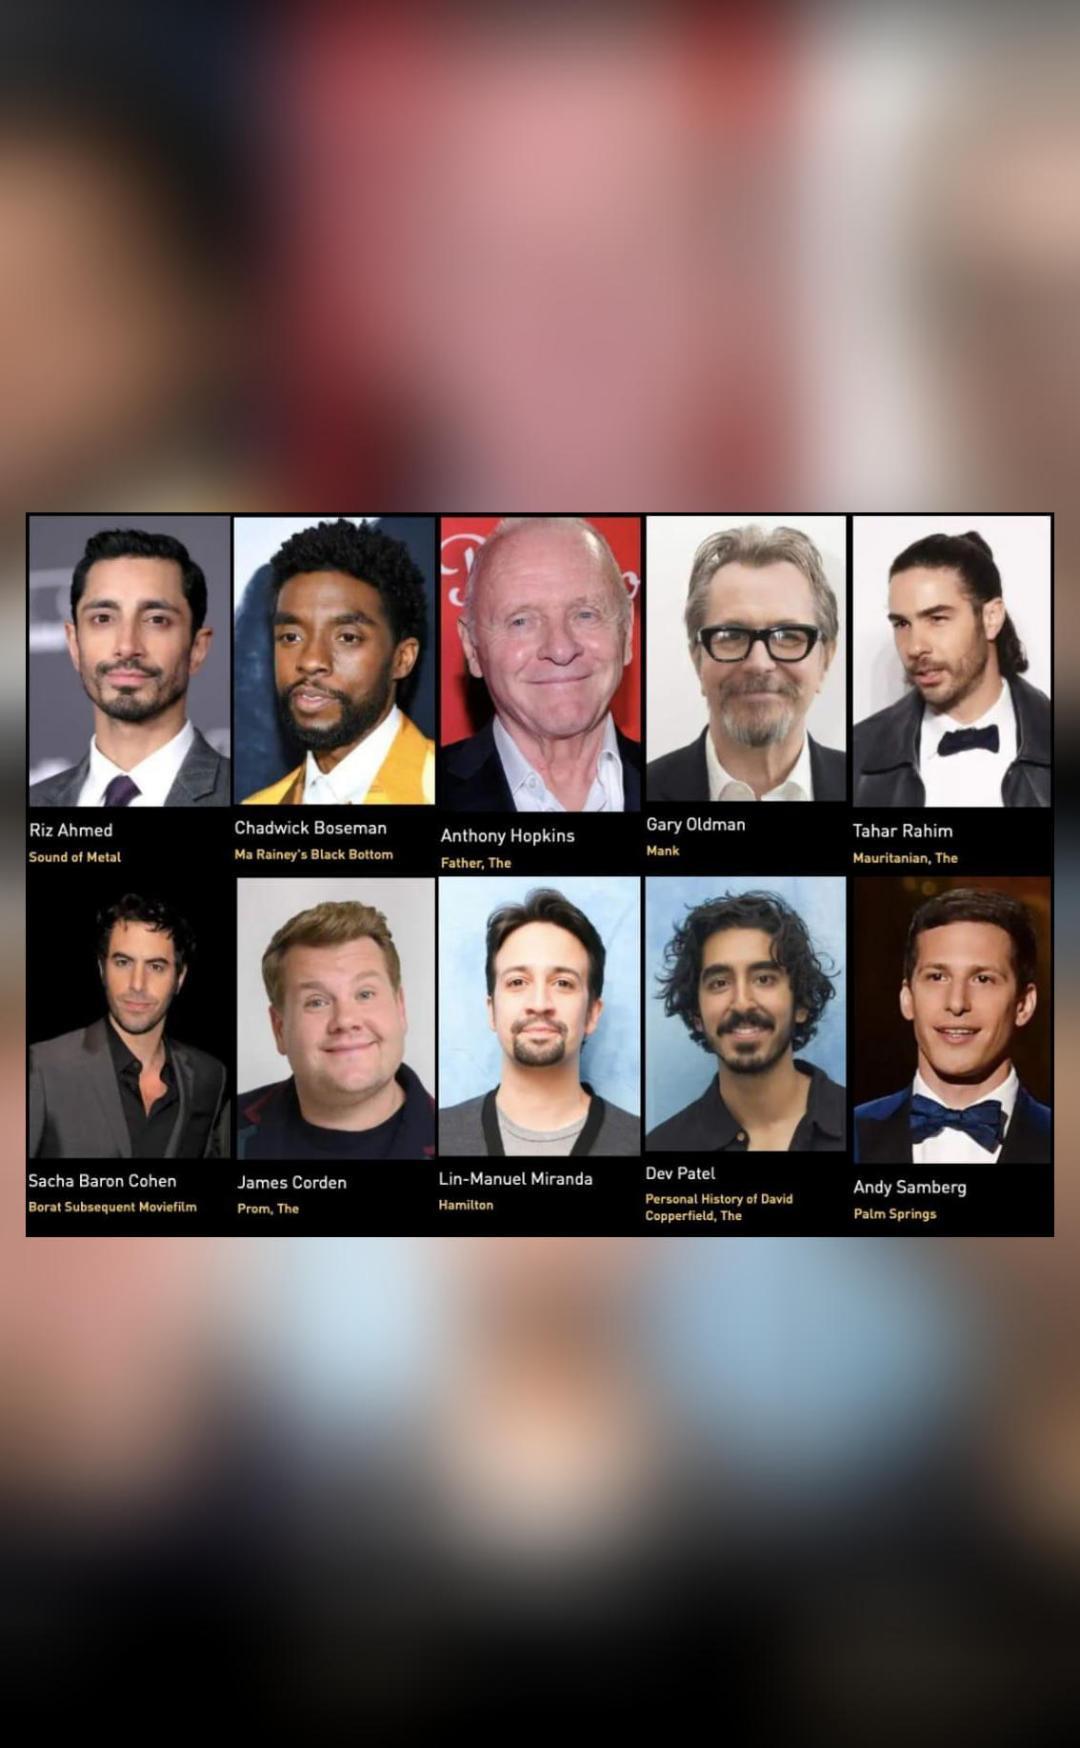 Who are the nominees for Best Actor at Golden Globes 2021